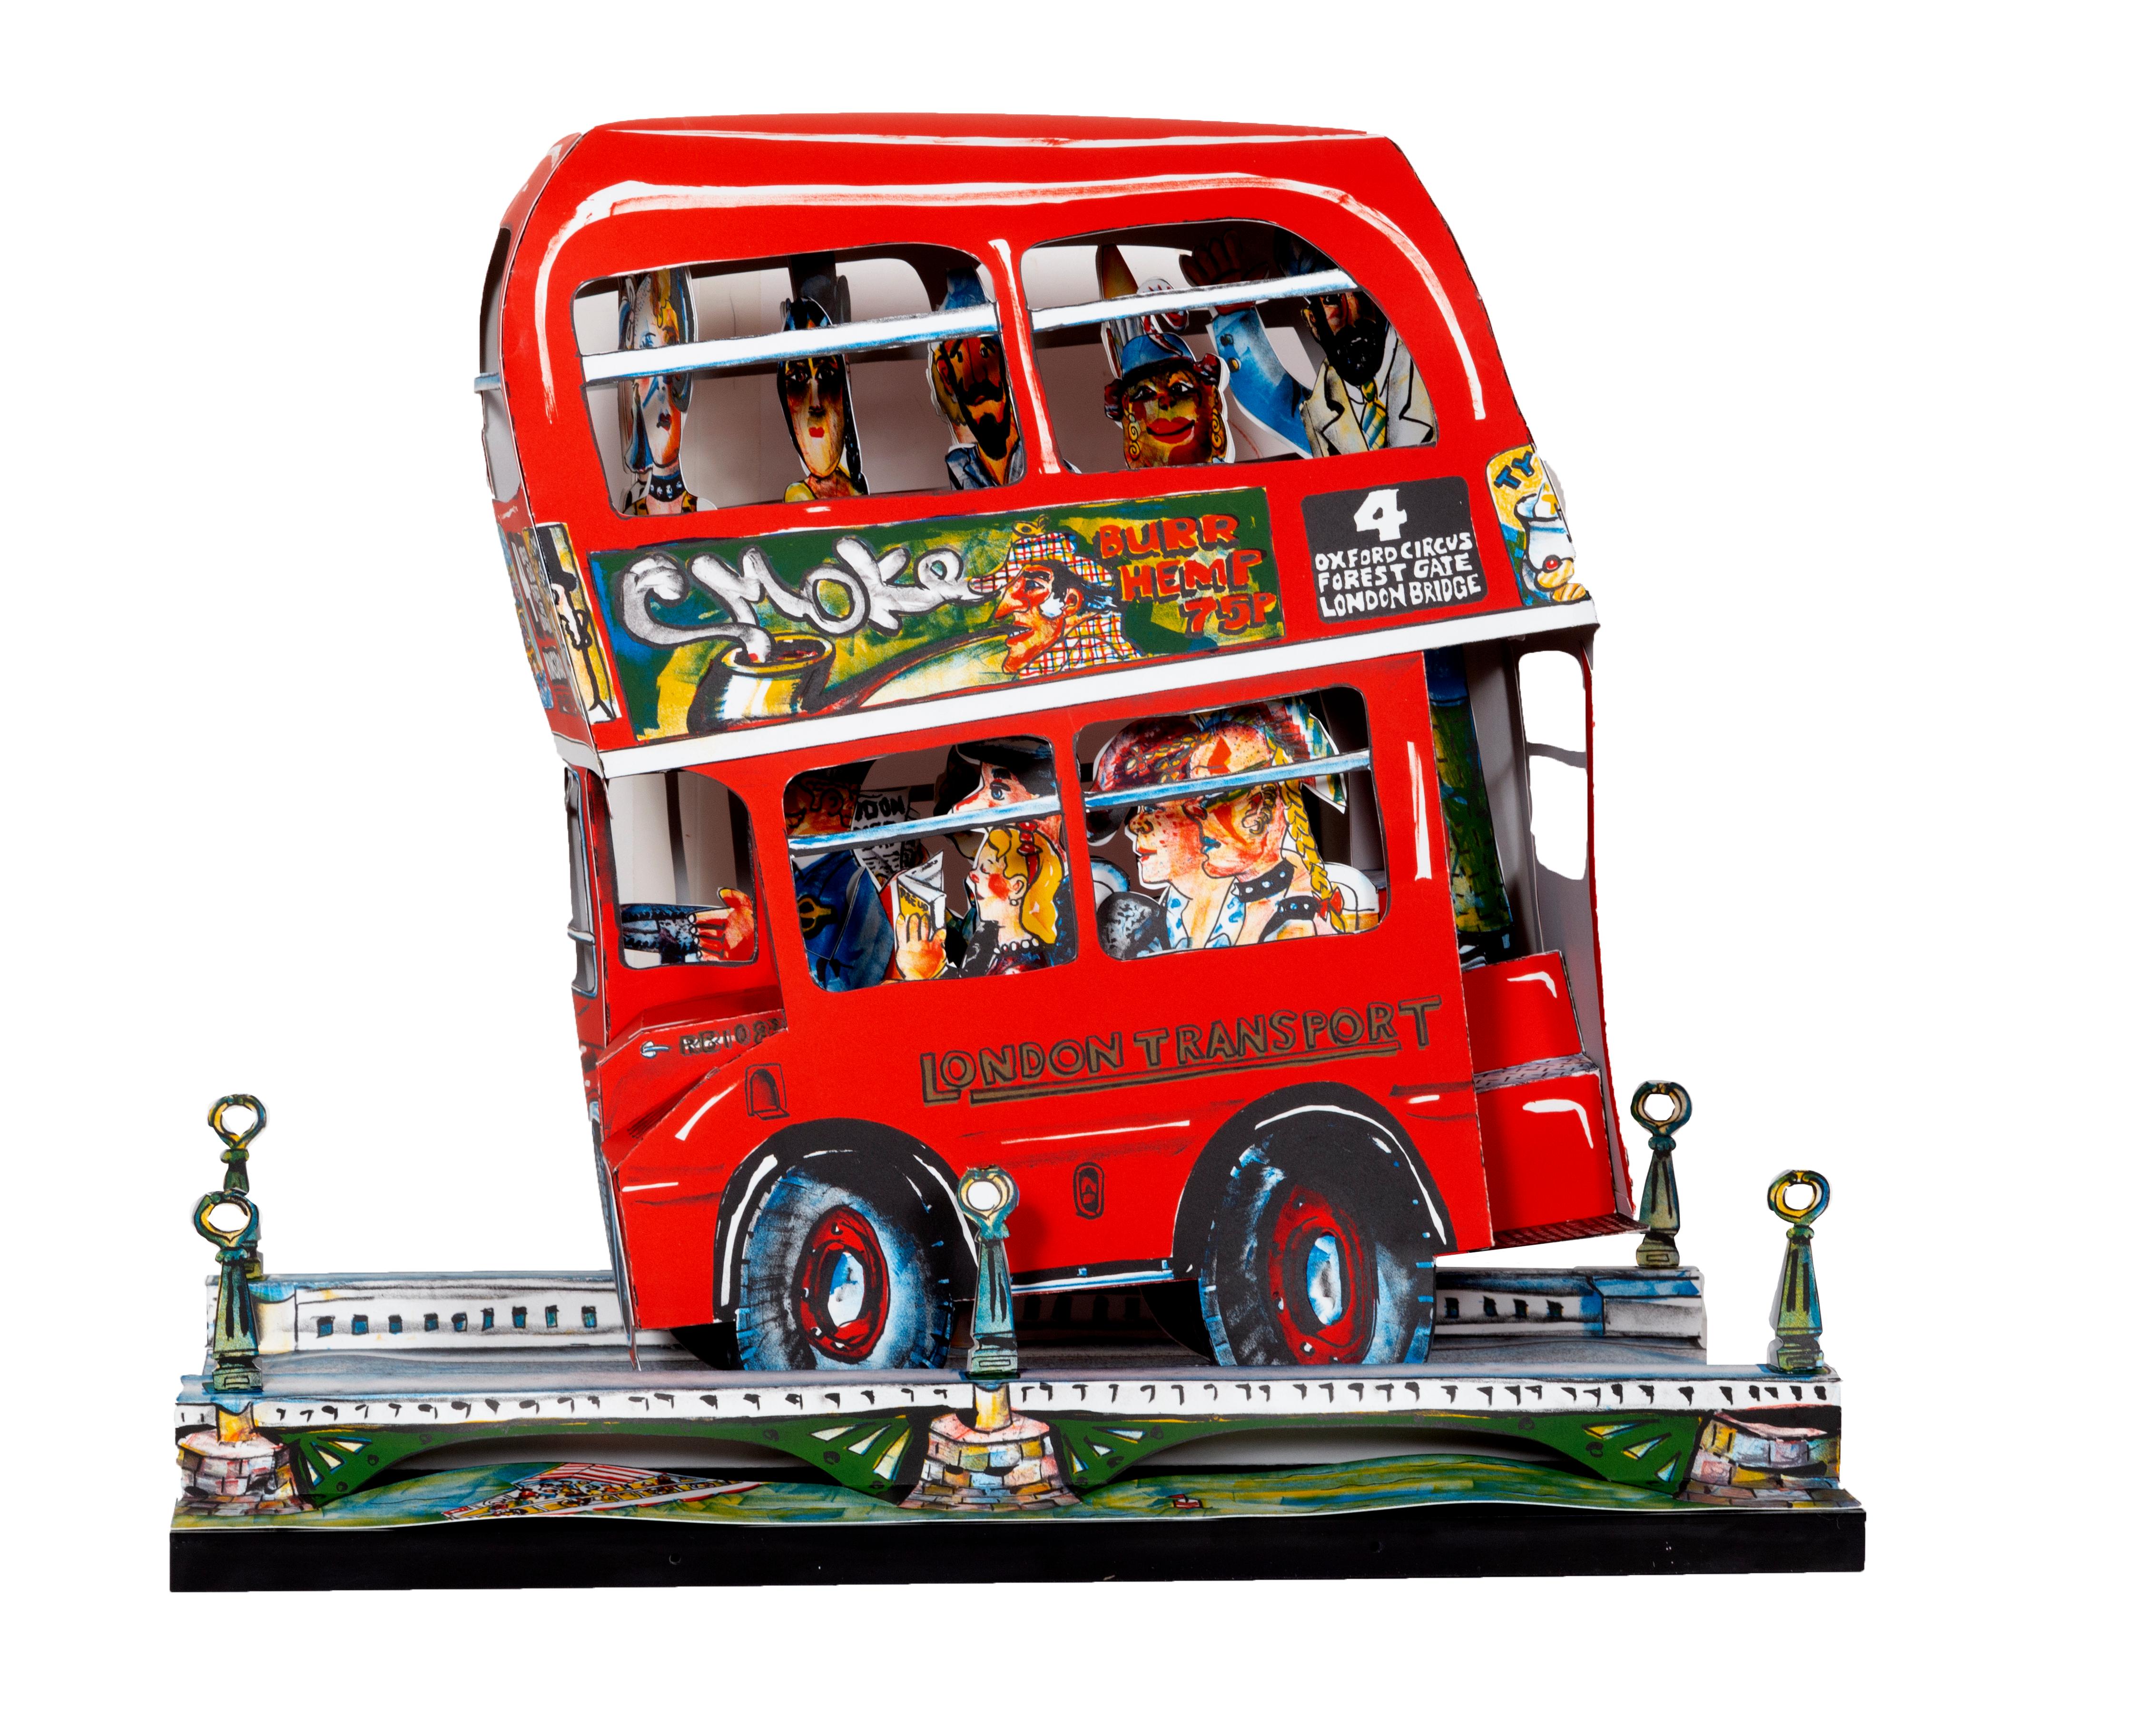 Artist: Red Grooms, American (1937 - )
Title: London Bus
Year: 1983 - 1984
Medium: 3-D Lithograph Construction on BFK Rives in a Plexi-Box, signed and numbered in pencil
Edition: 5/63
Size: 19 x 21.5 x 13.5 in. (48.26 x 54.61 x 34.29 cm)

Referenced